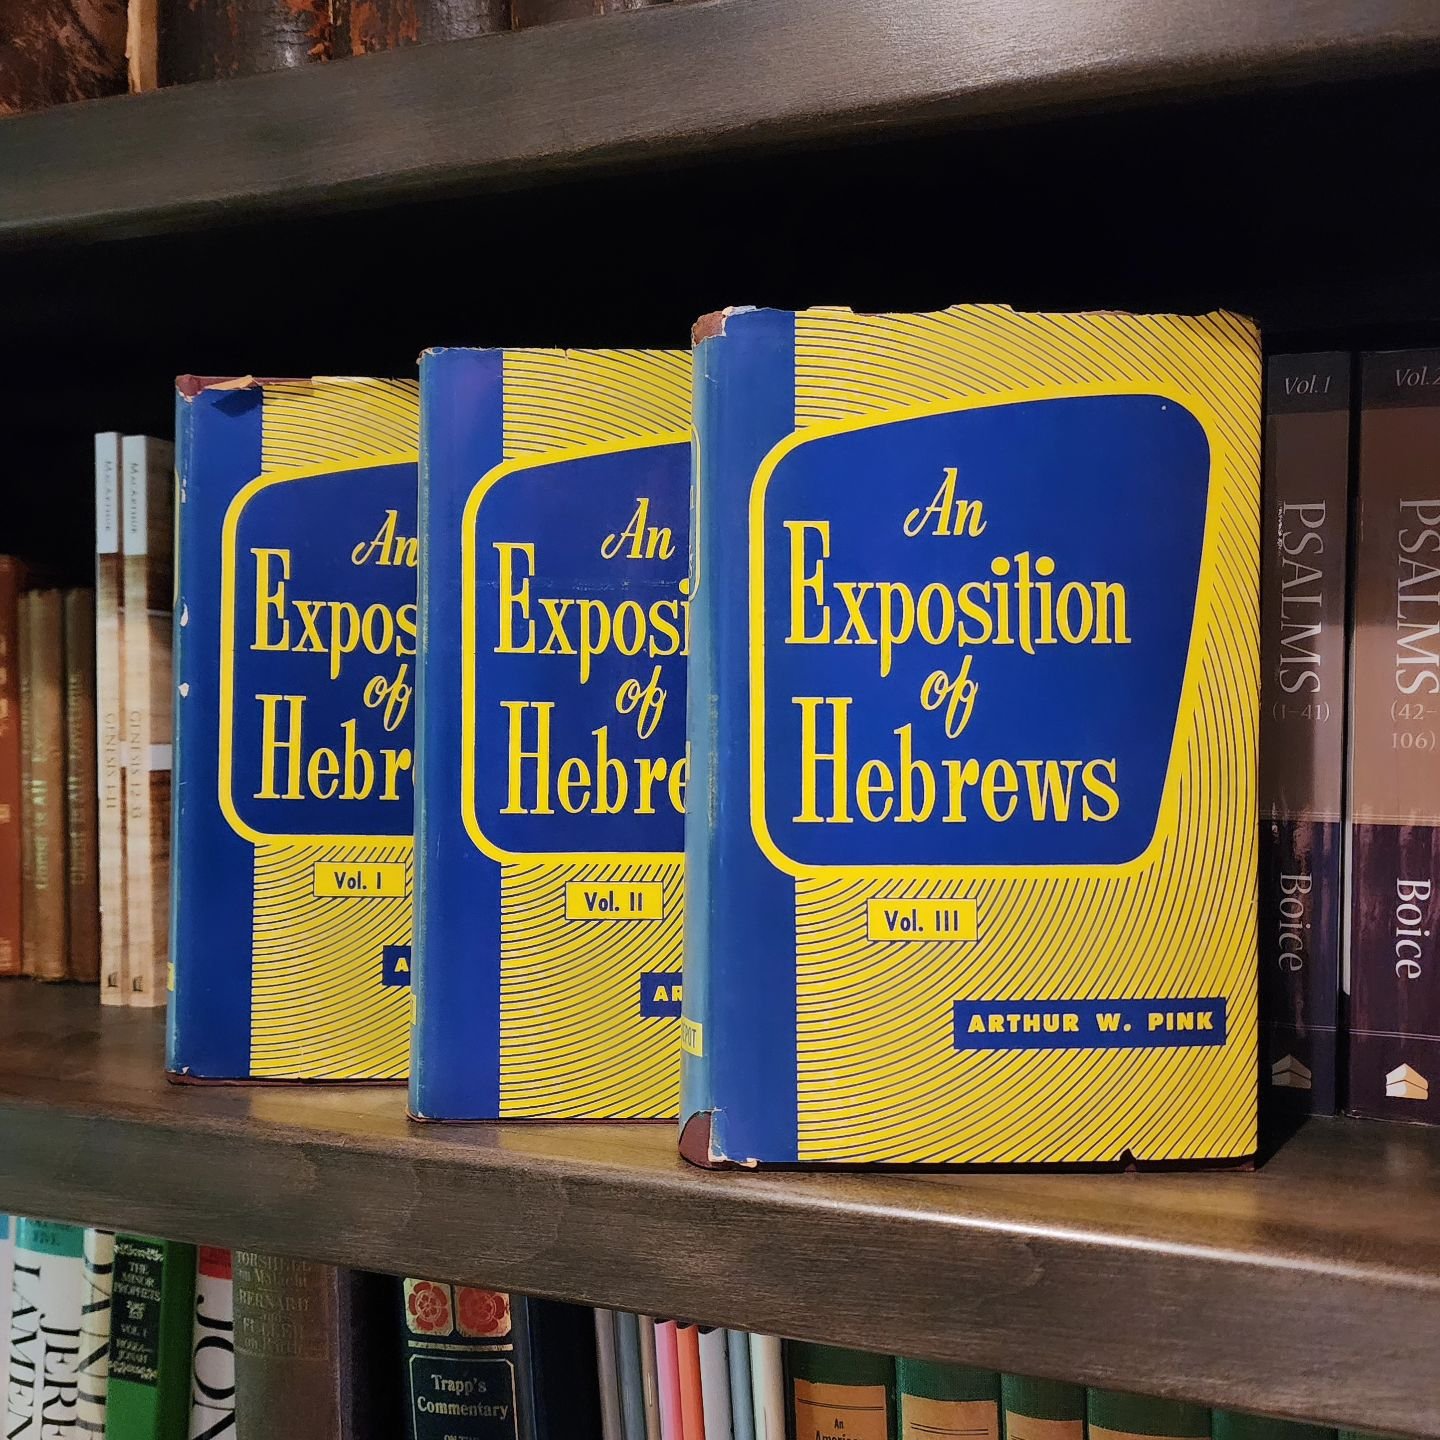 Today's addition to the APC Library is a first edition 3 vol. set of A.W. Pink's Exposition of Hebrews. Published by Bible Truth Depot (I.C. Herendeen) in 1954&mdash;Pink died in '52&mdash;these were first entries in his Studies in the Scriptures. Co